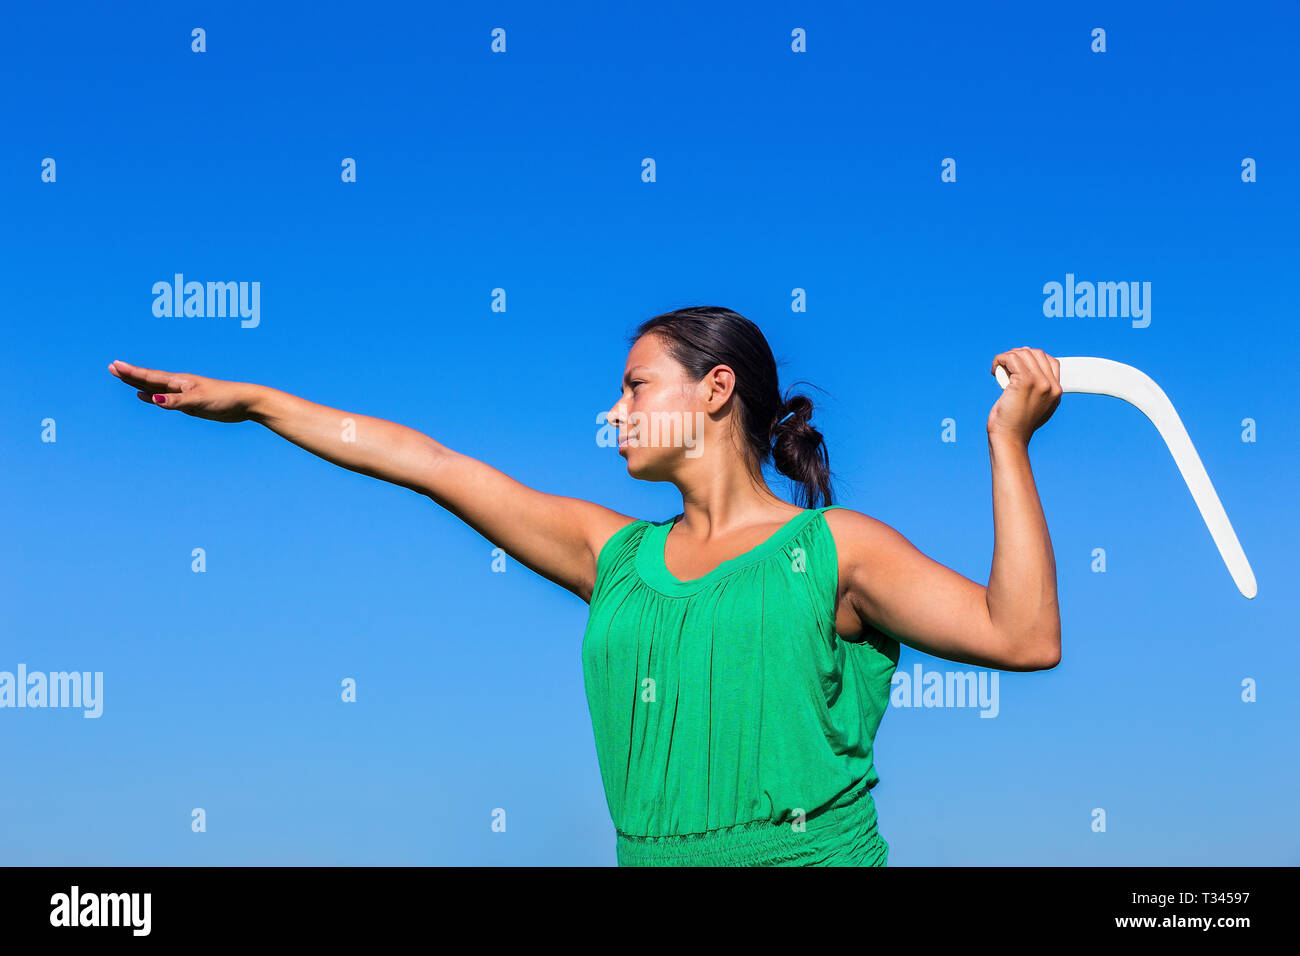 Young colombian woman throwing white boomerang in blue air Stock Photo